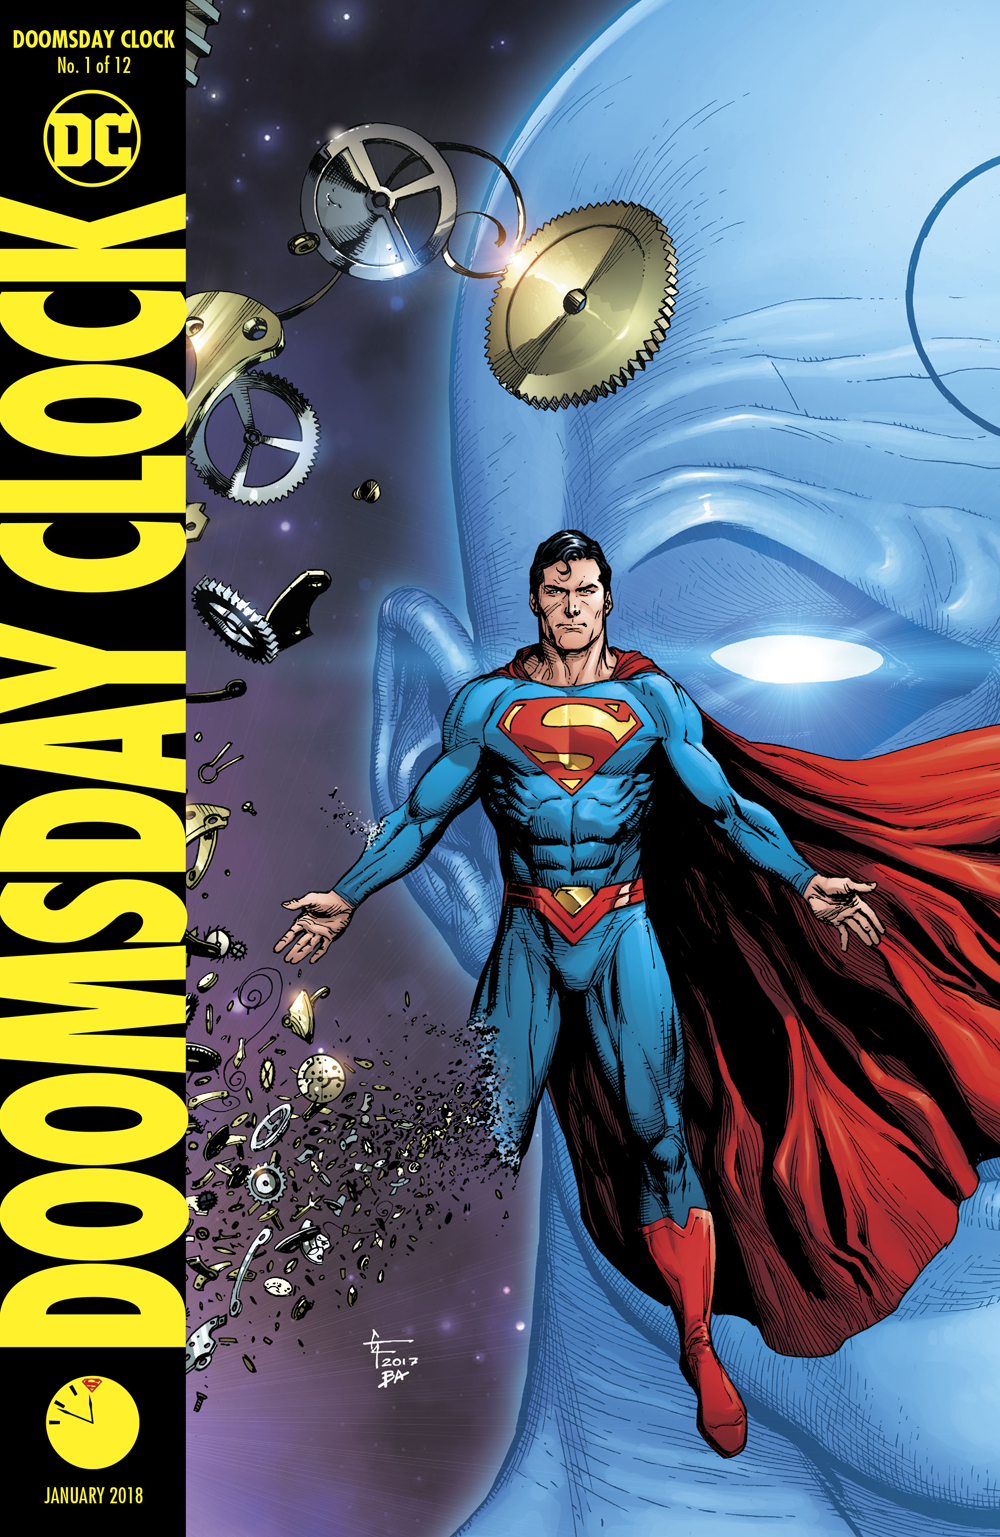 Doomsday Clock #1 review: Watchmen's sequel is finally here